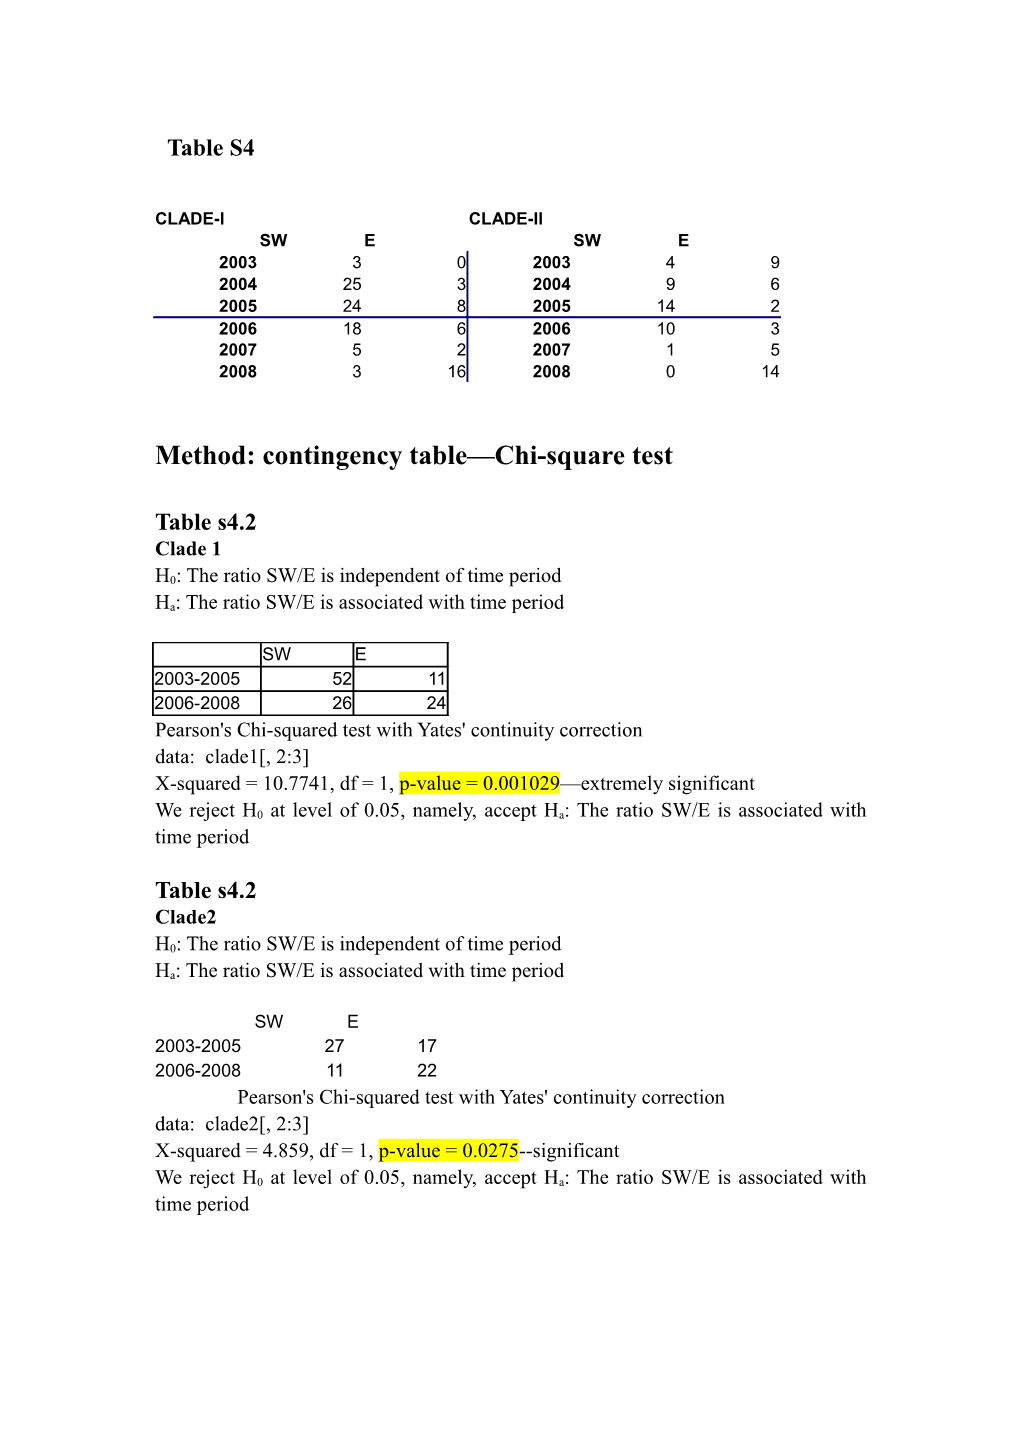 Method: Contingency Table Chi-Square Test